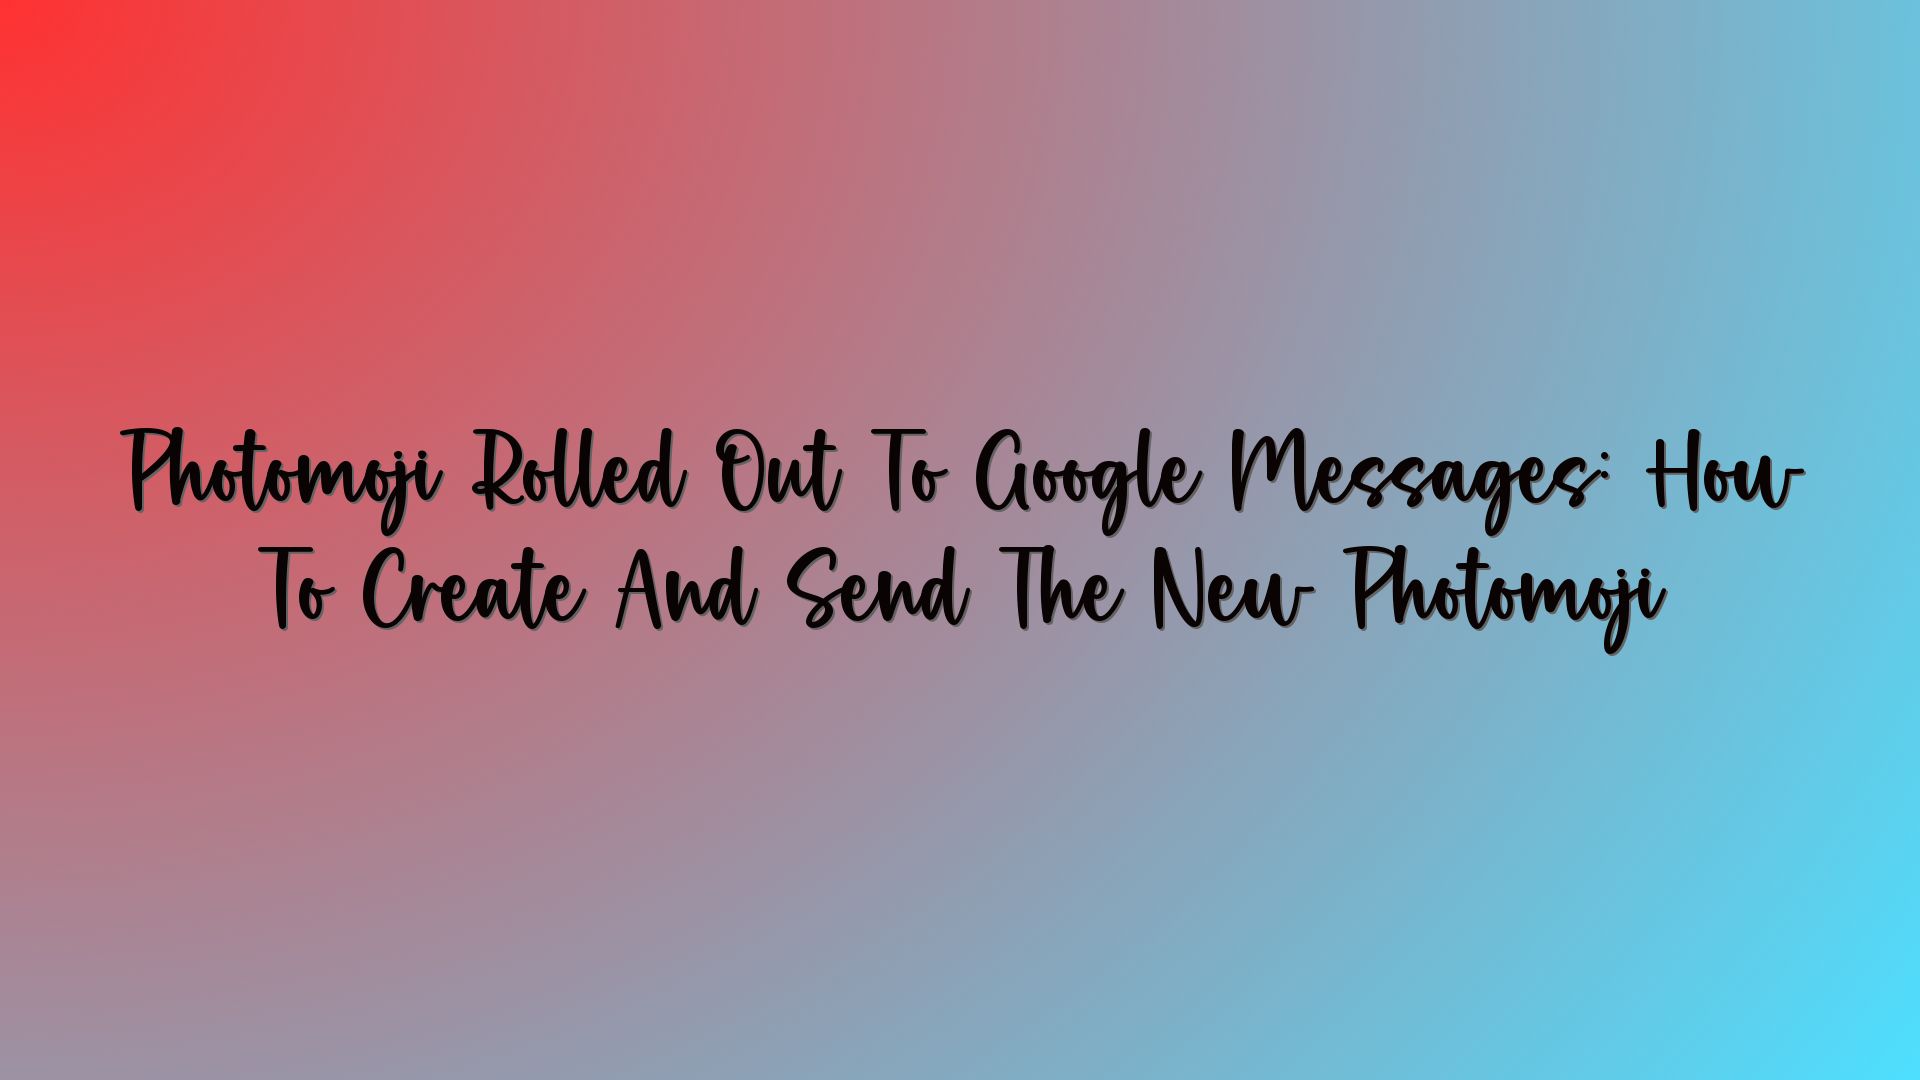 Photomoji Rolled Out To Google Messages: How To Create And Send The New Photomoji